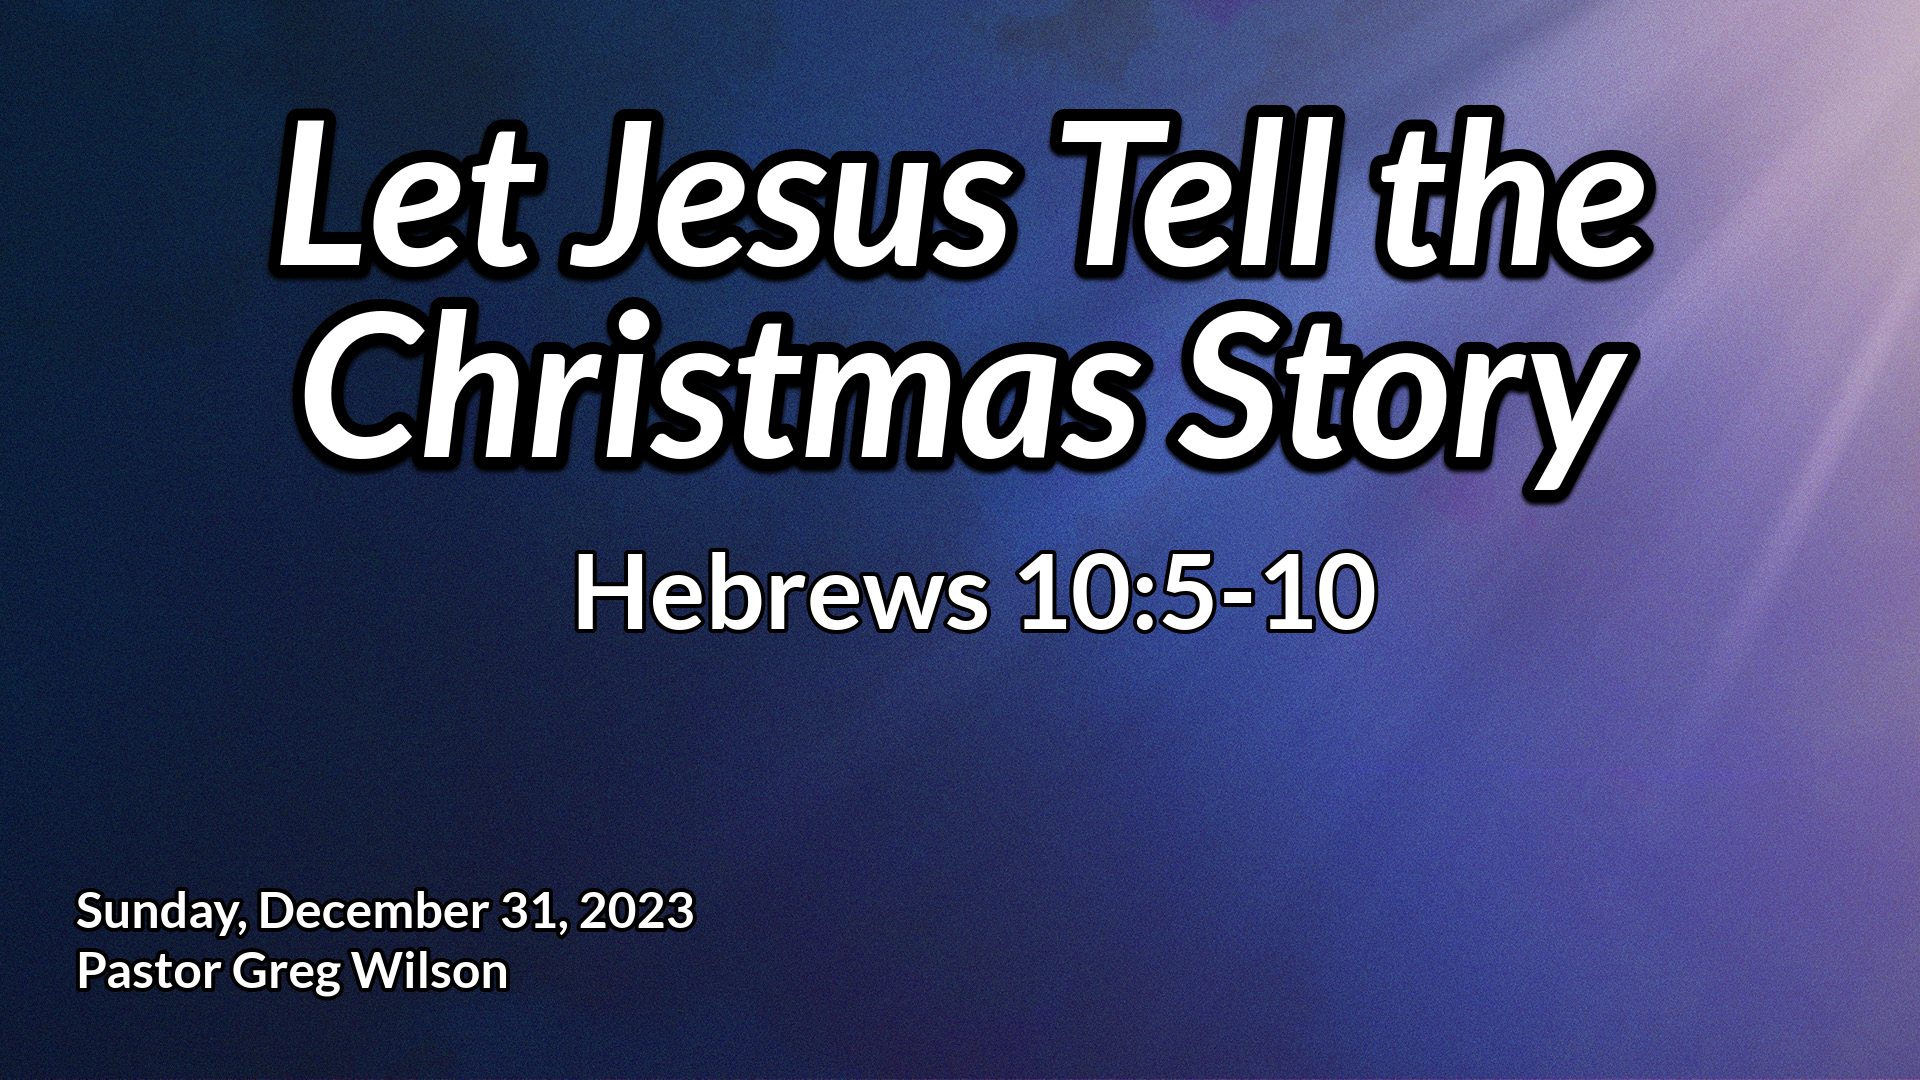 "Let Jesus Tell the Christmas Story"